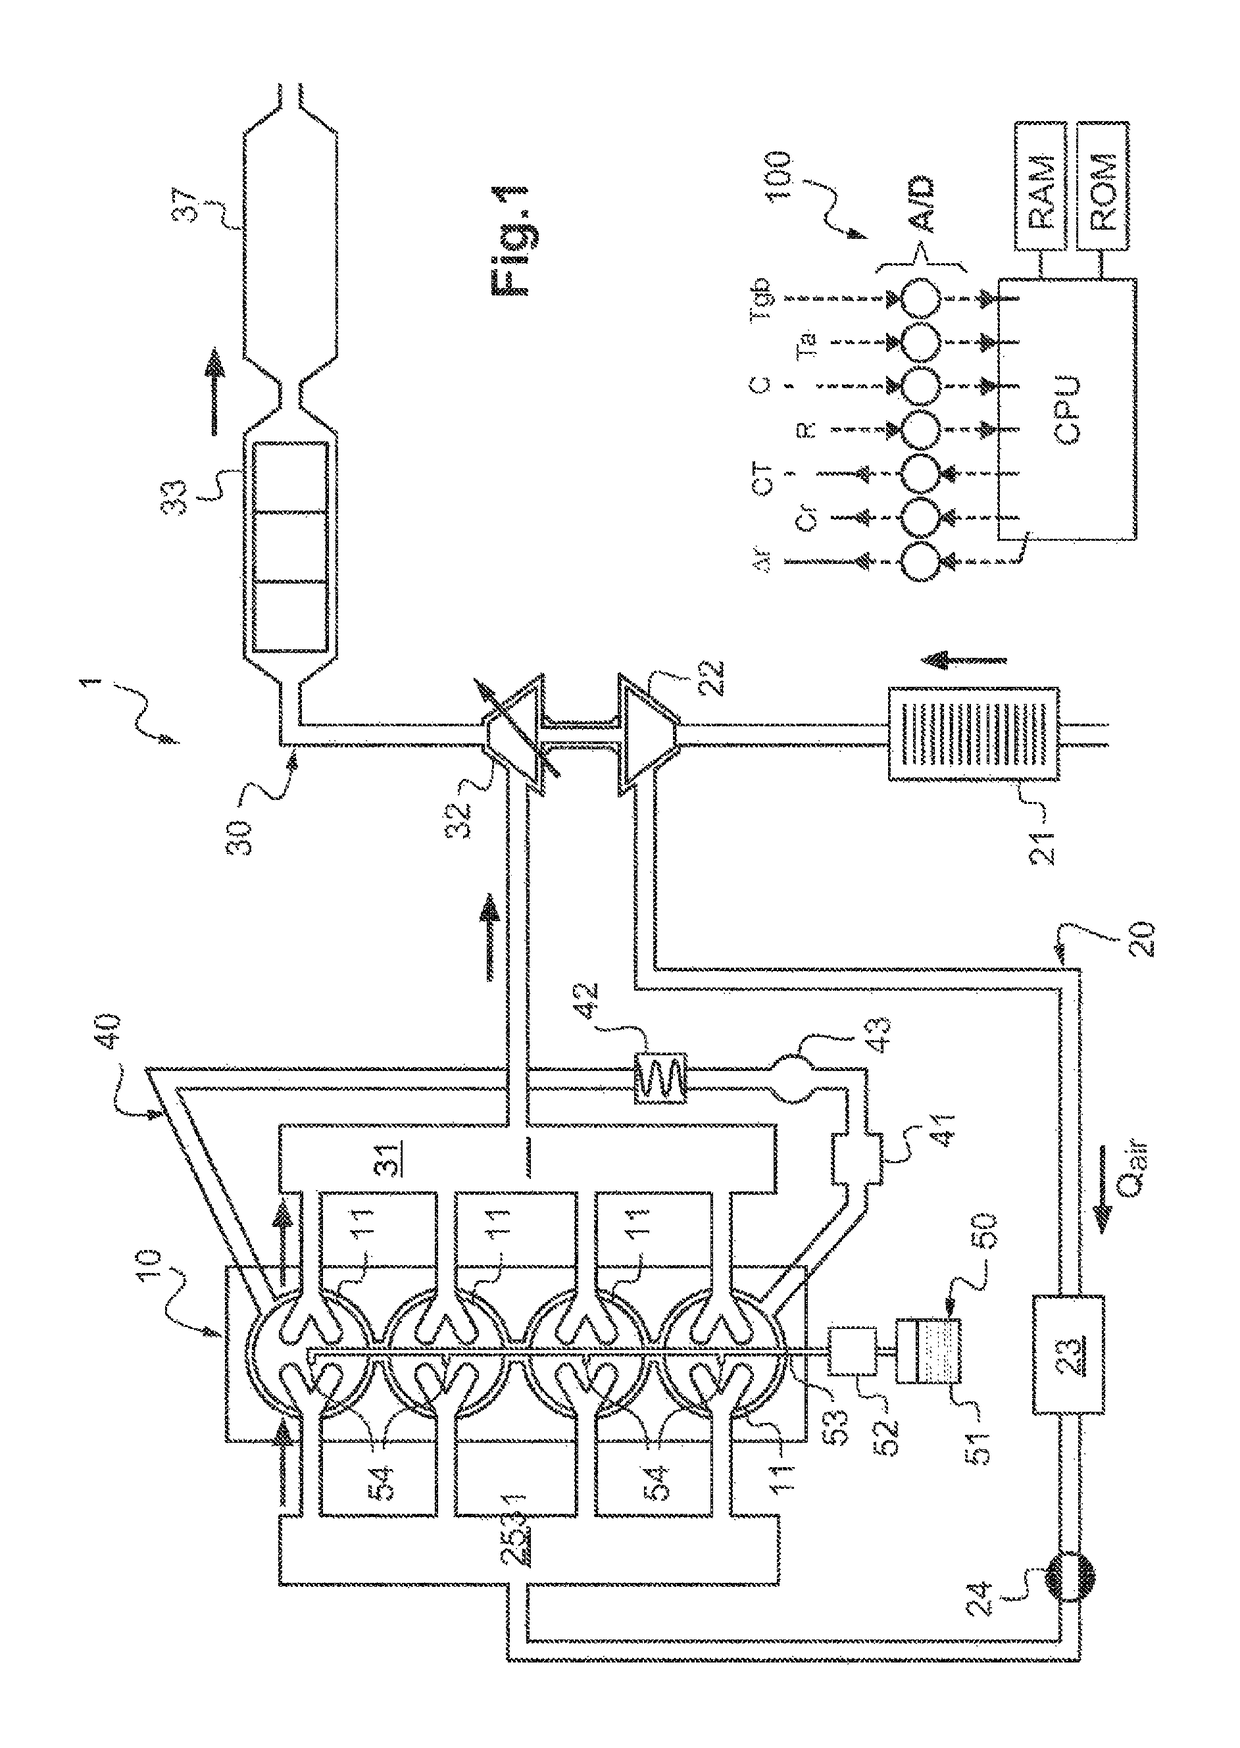 Method for controlling an internal combustion engine